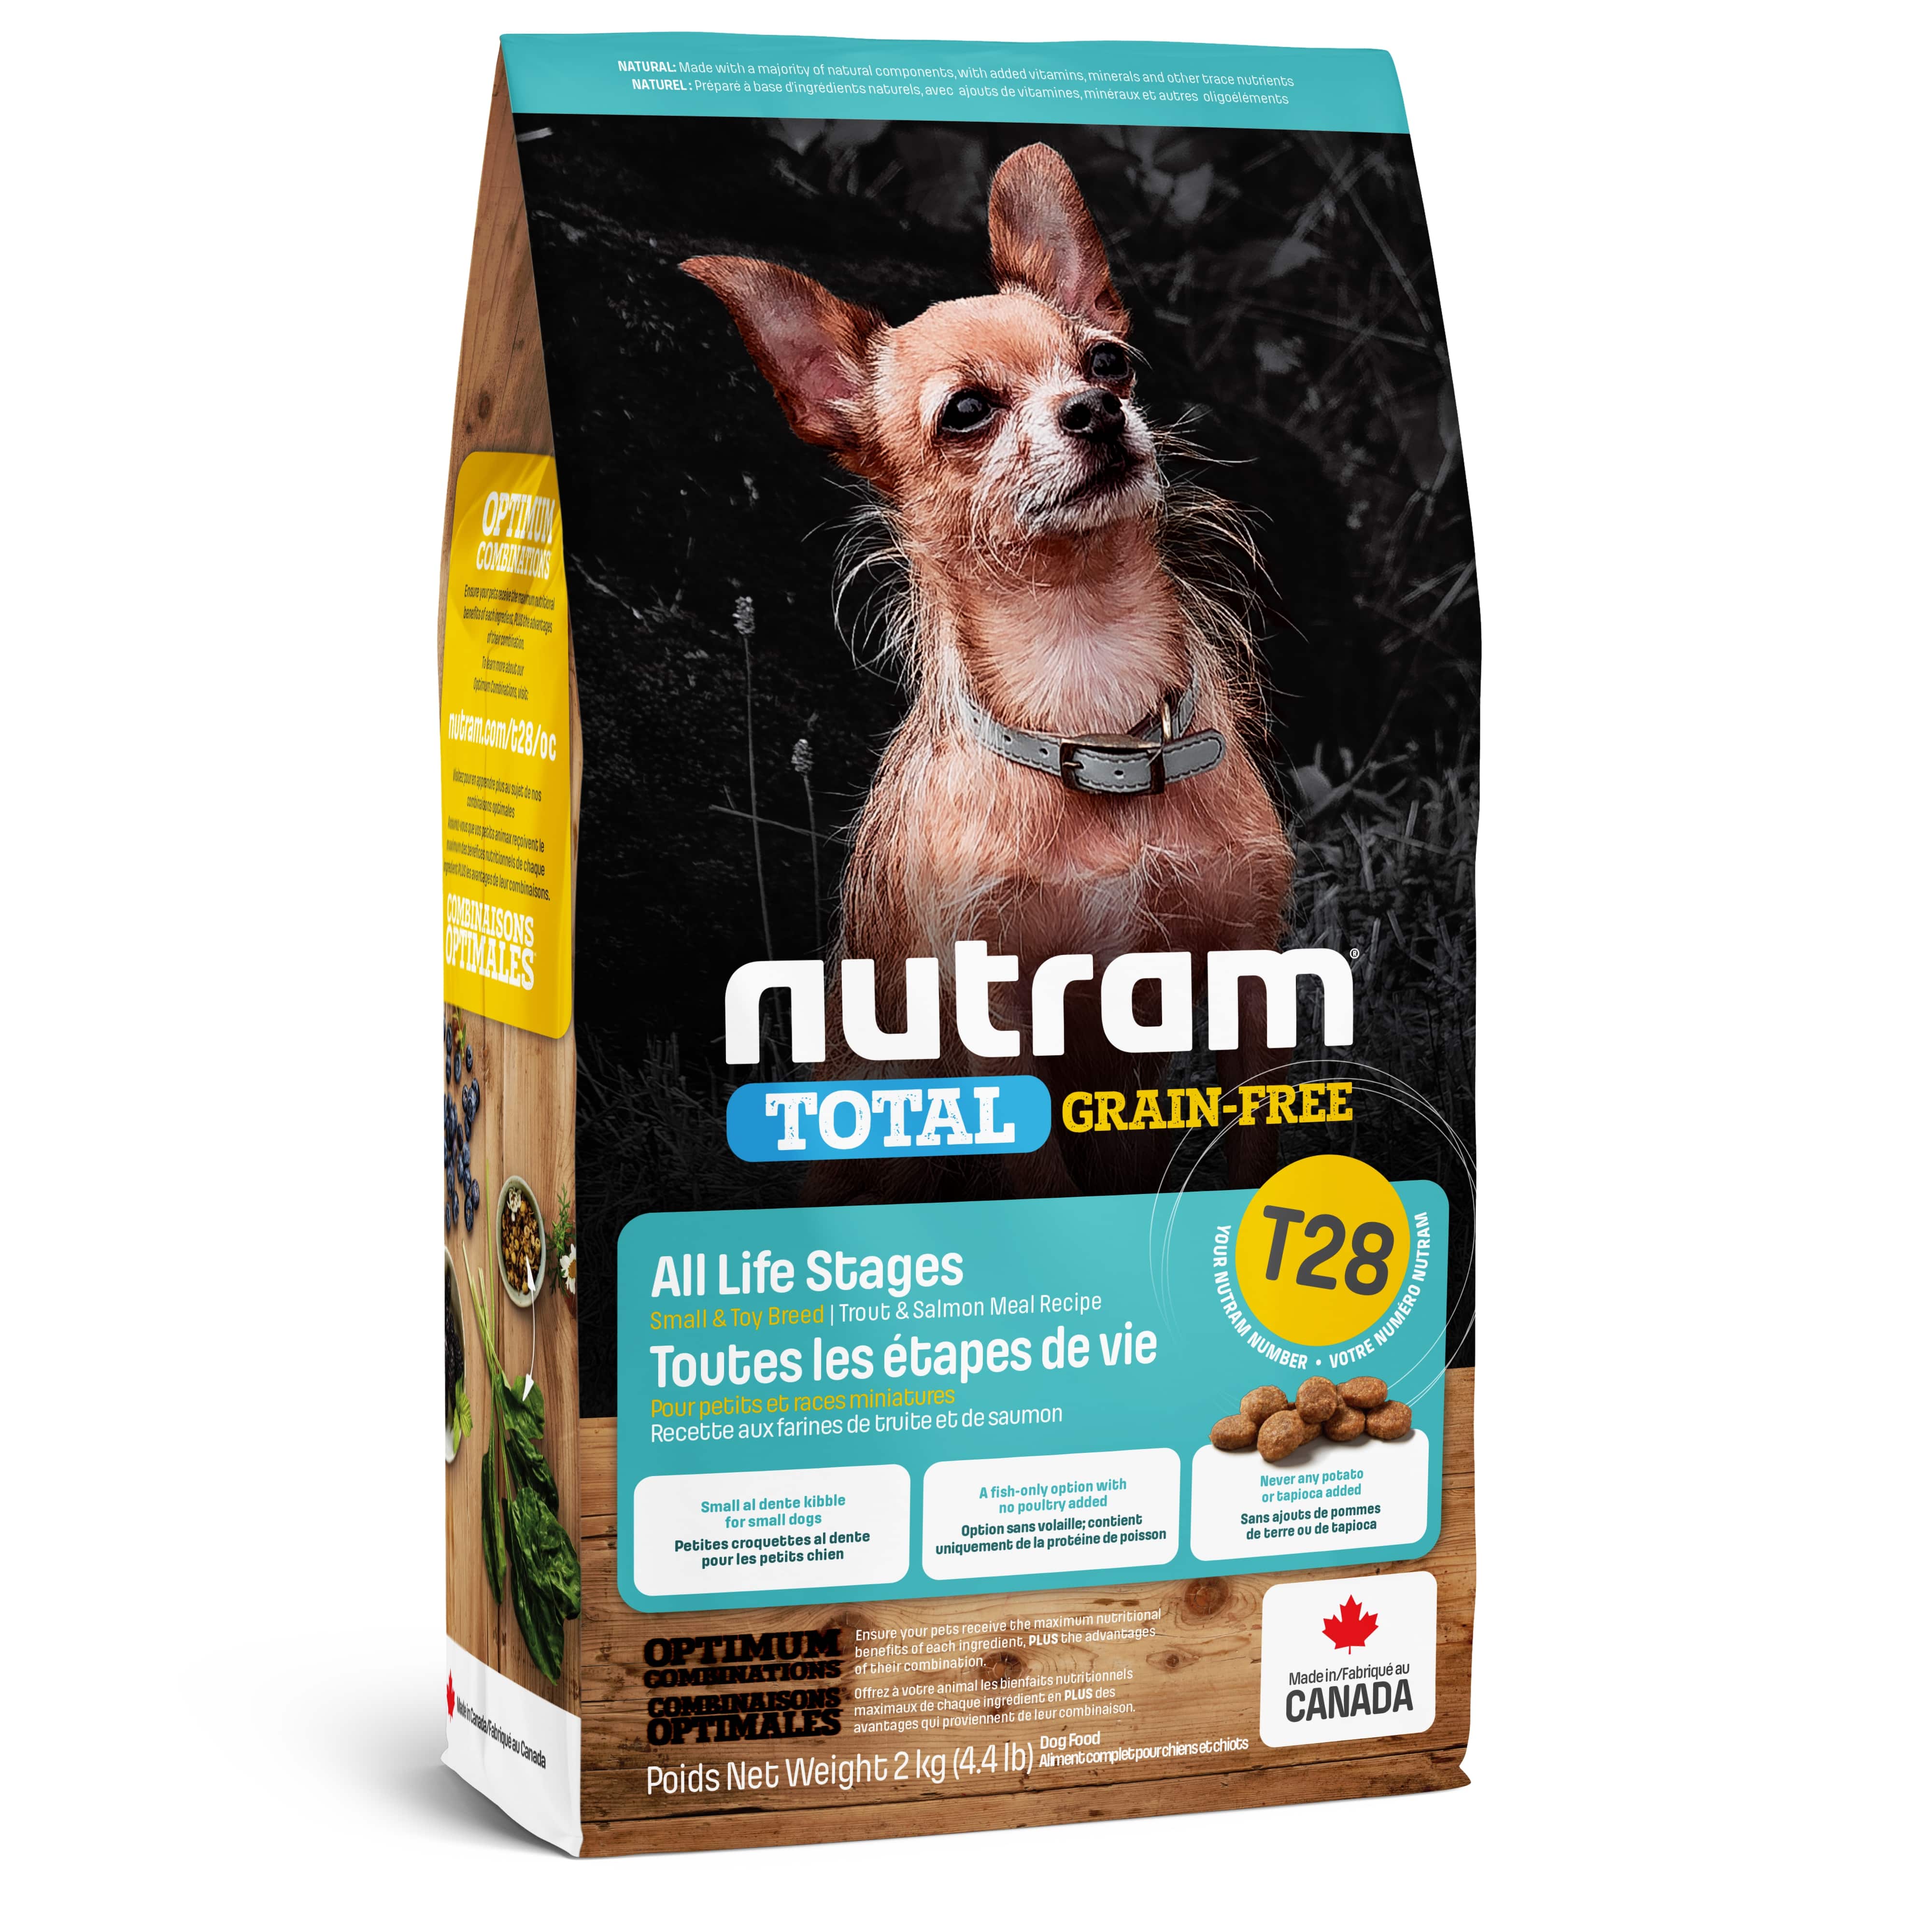 T28 Nutram Total Grain-Free® Trout and Salmon Recipe Small Breed Dog Food